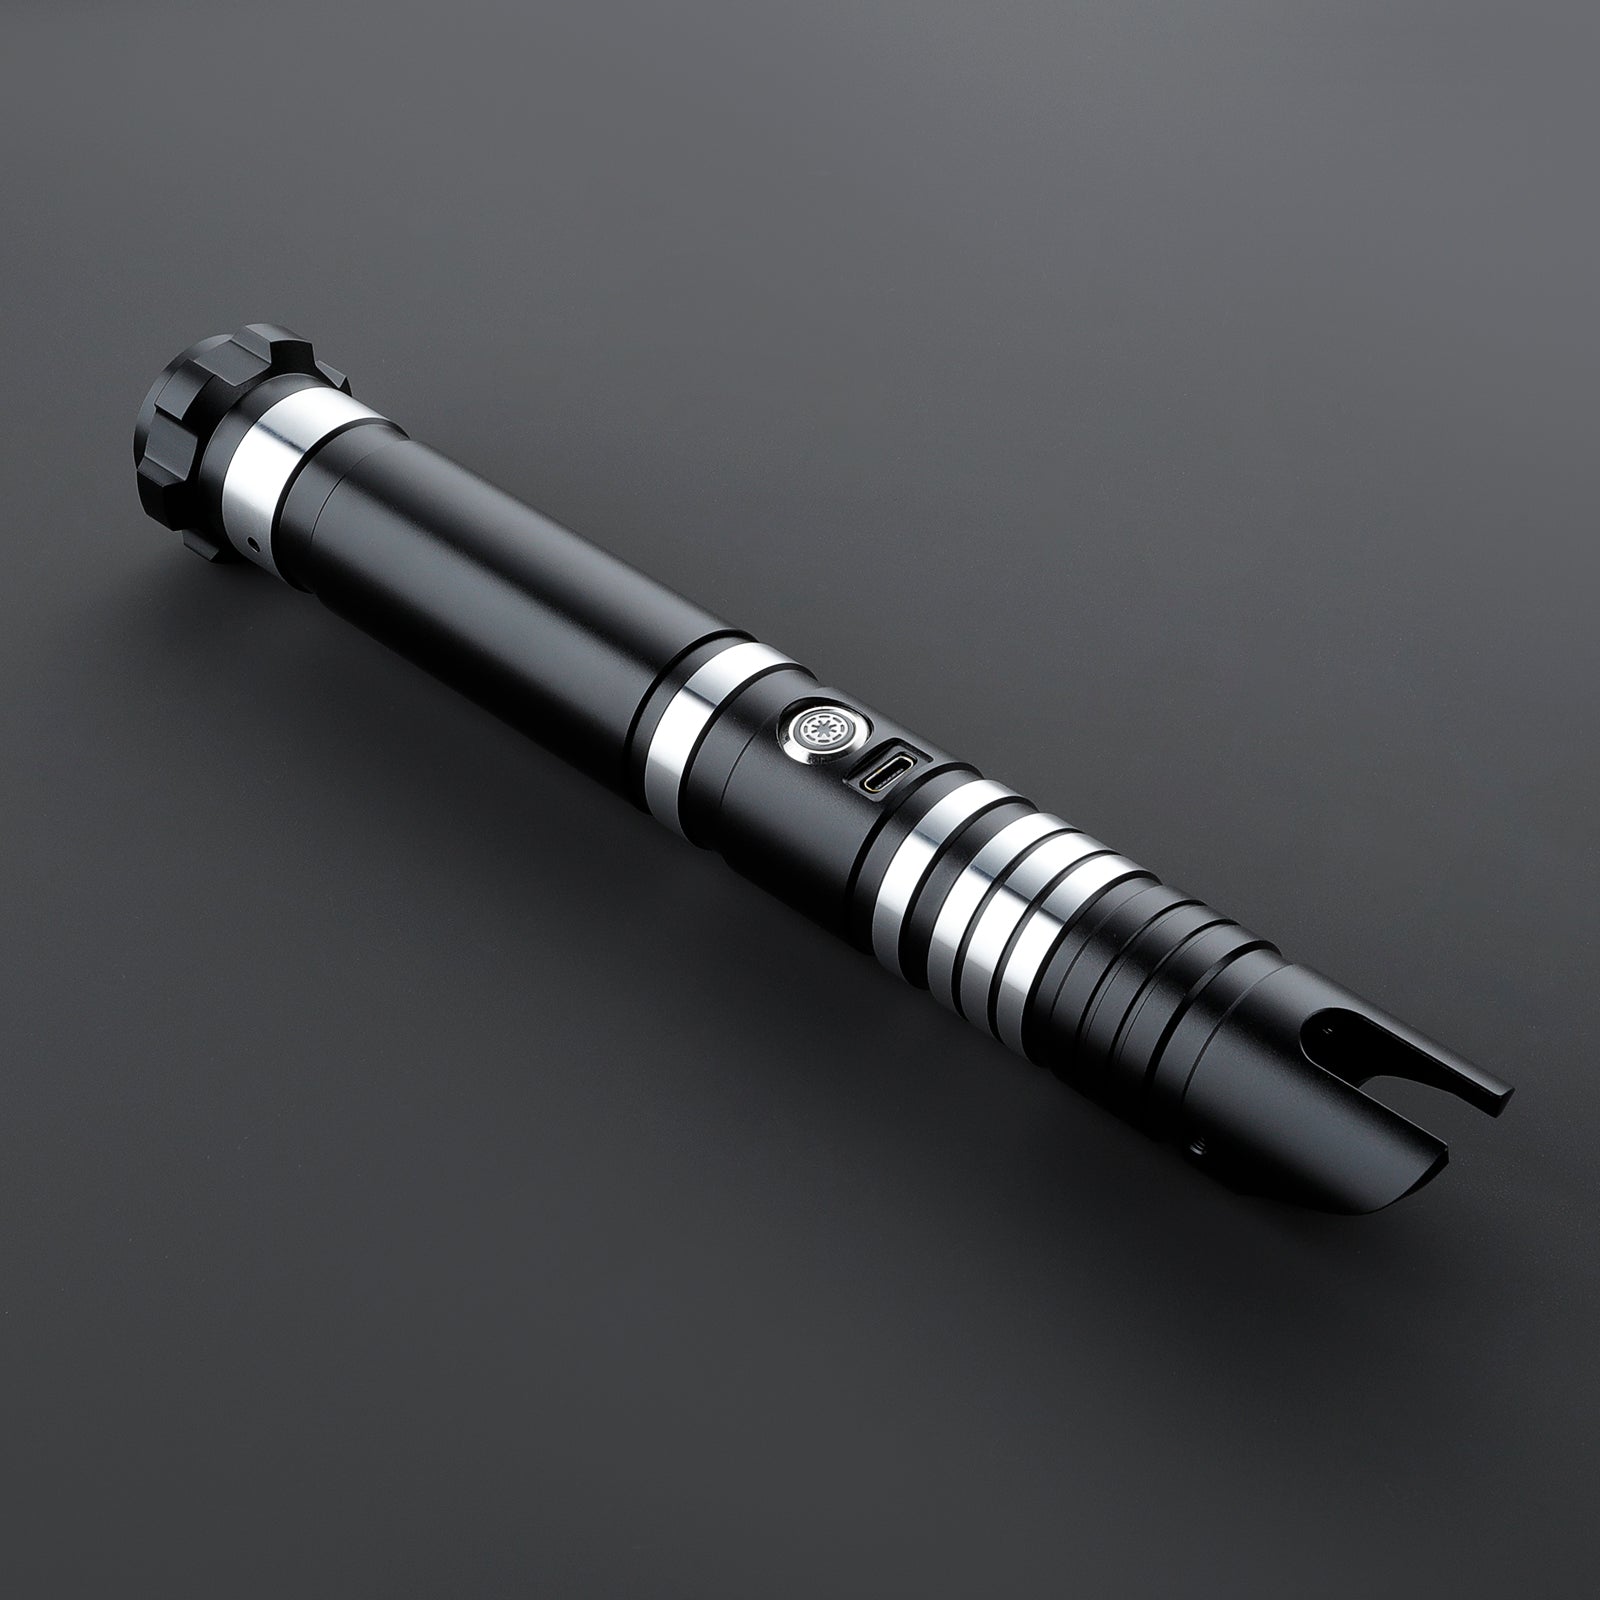 SaberCustom dueling lightsaber infinite color changing 12 sound fonts smooth swing motion control